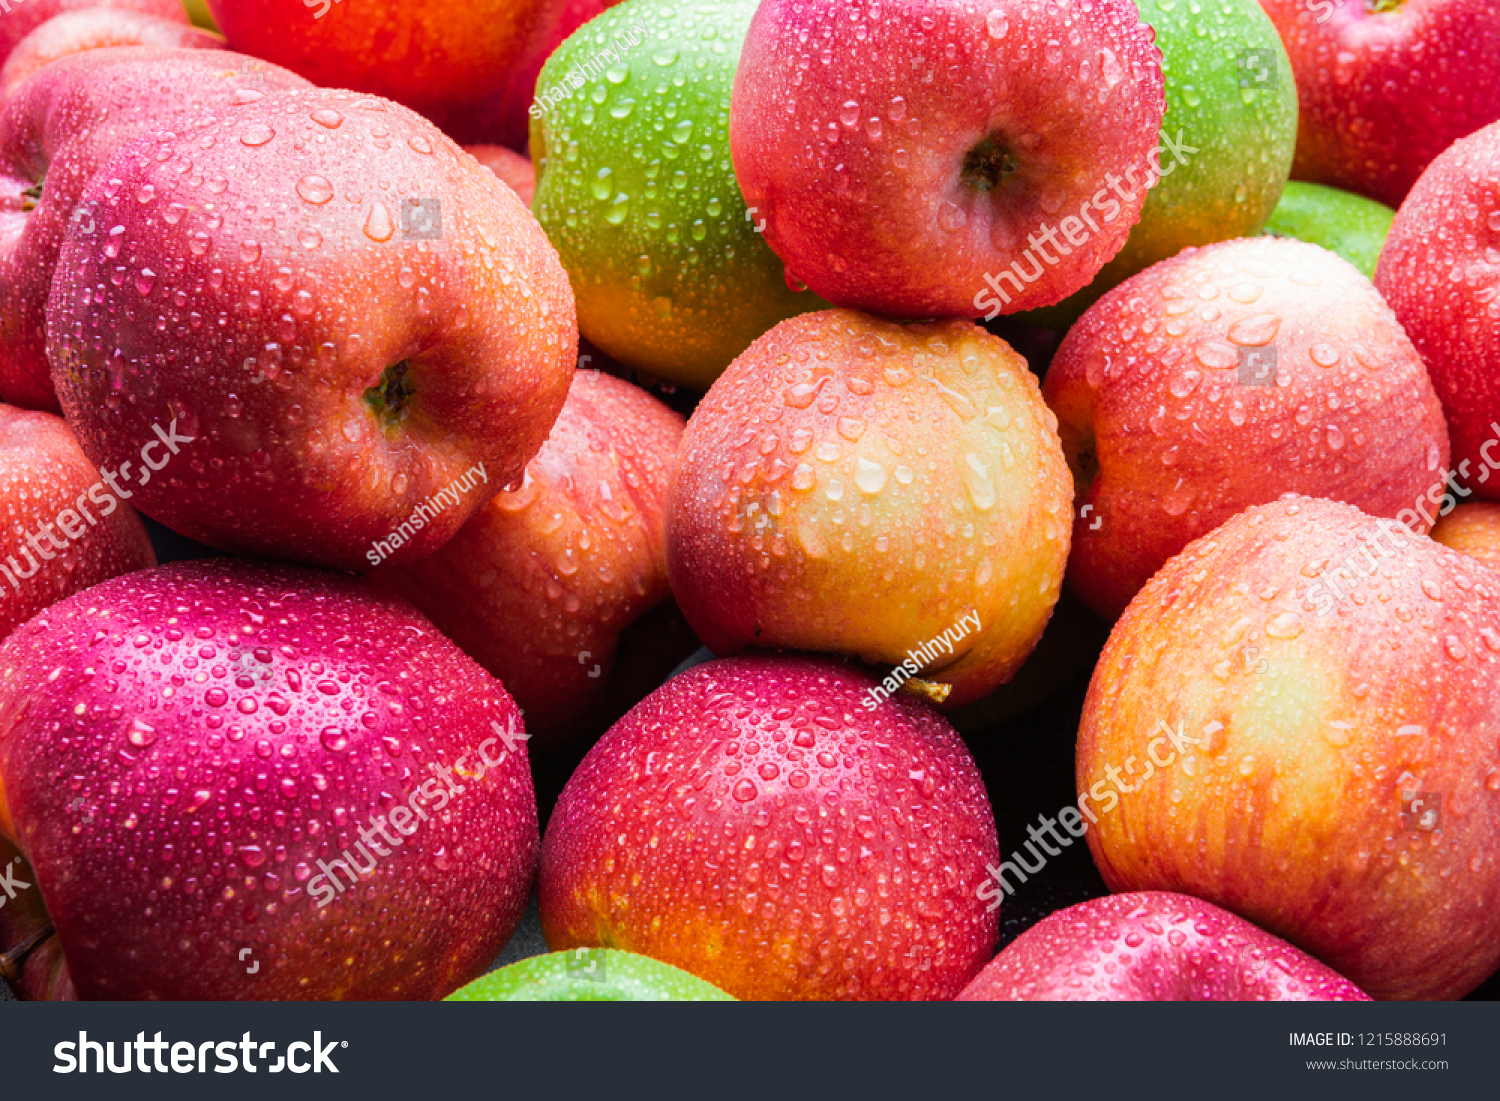 heap of fresh clean green and red apples with drops of water mix on black background, top side view closeup #1215888691